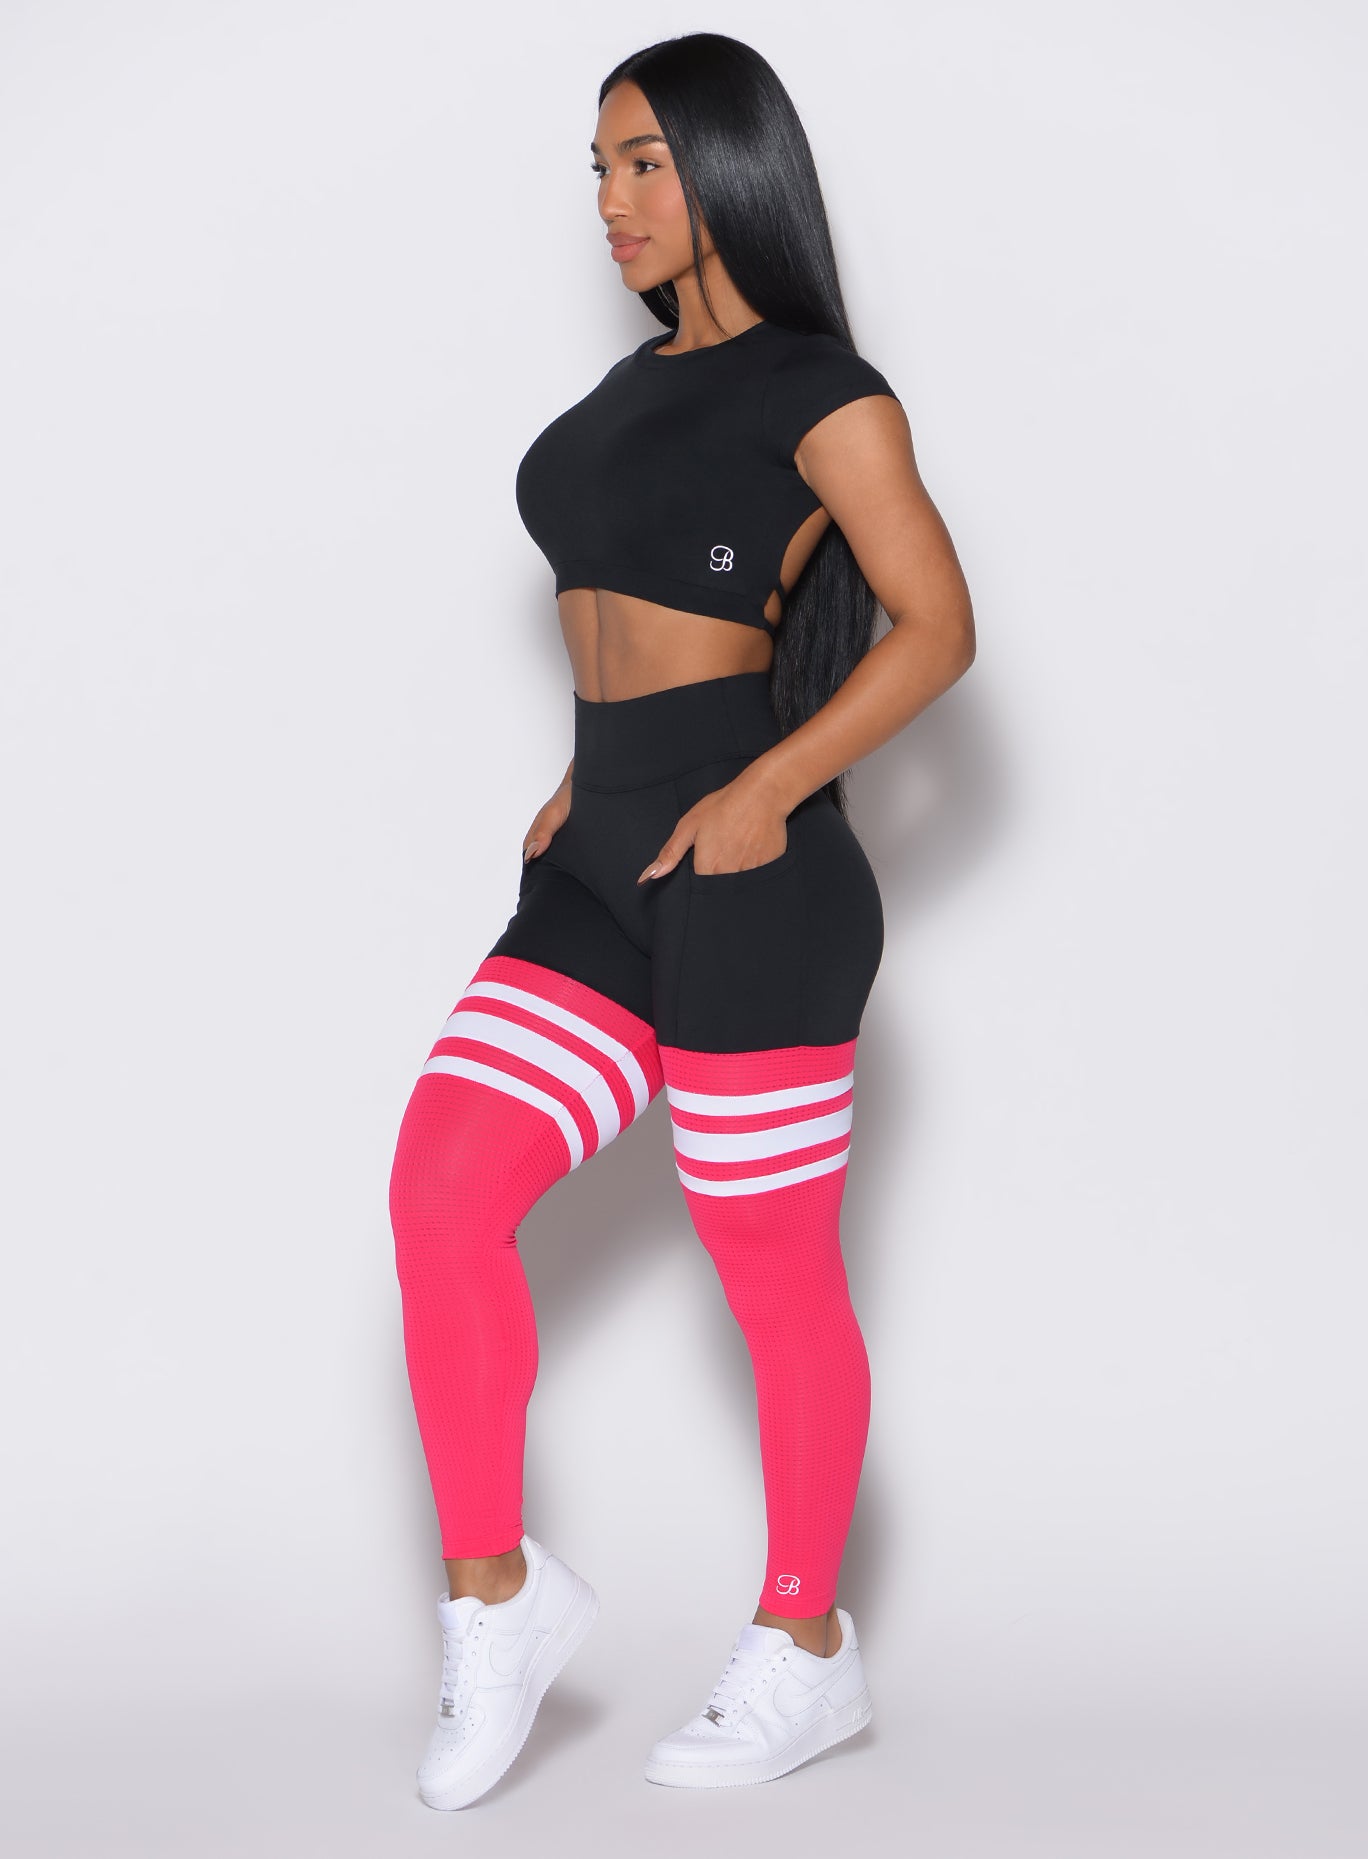 Left profile view of a model wearing the Scrunch Thigh Highs in Black and Berry Color along with a black tee